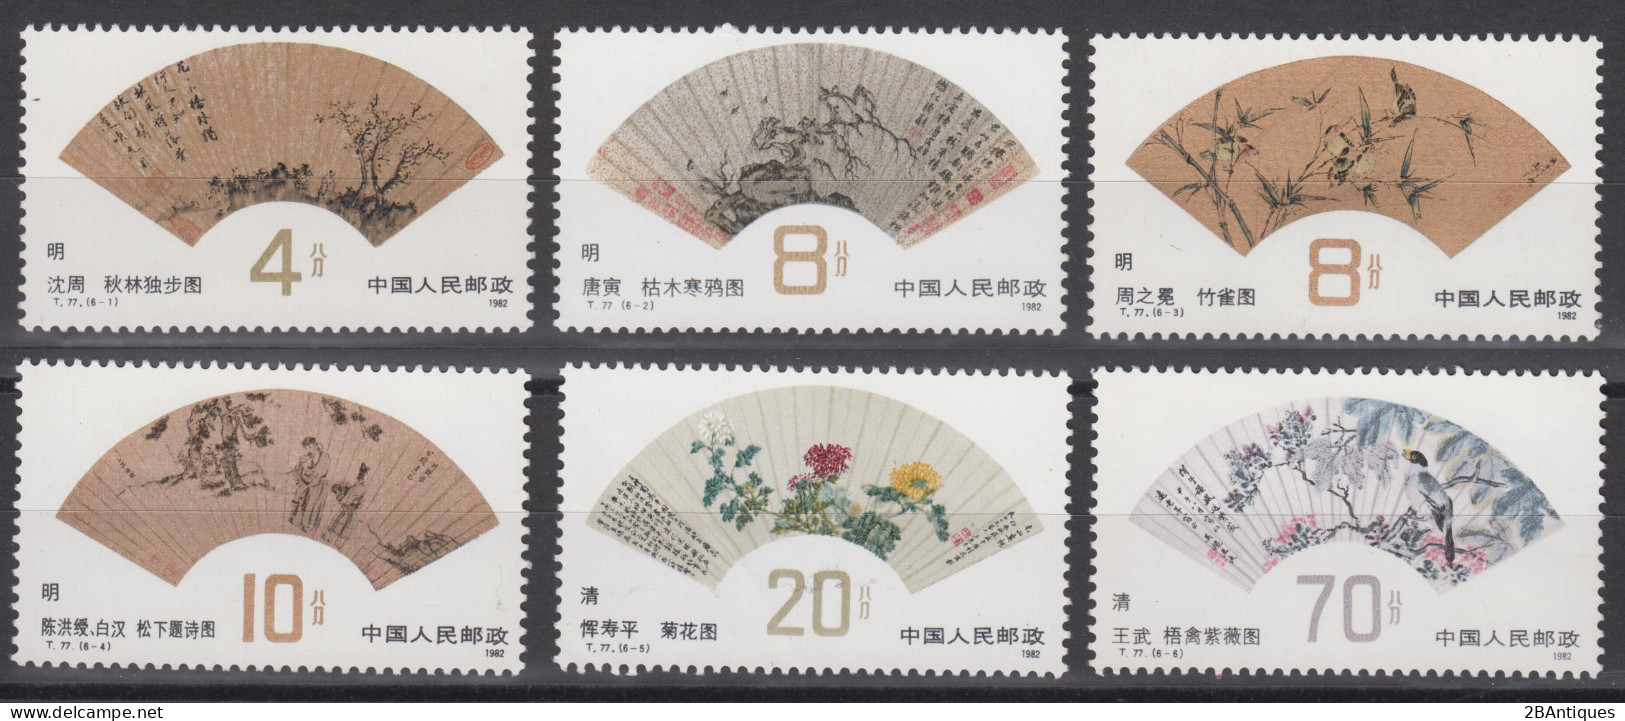 PR CHINA 1982 - Fan Paintings Of The Ming And Qing Dynasties MNH** OG XF - Ongebruikt